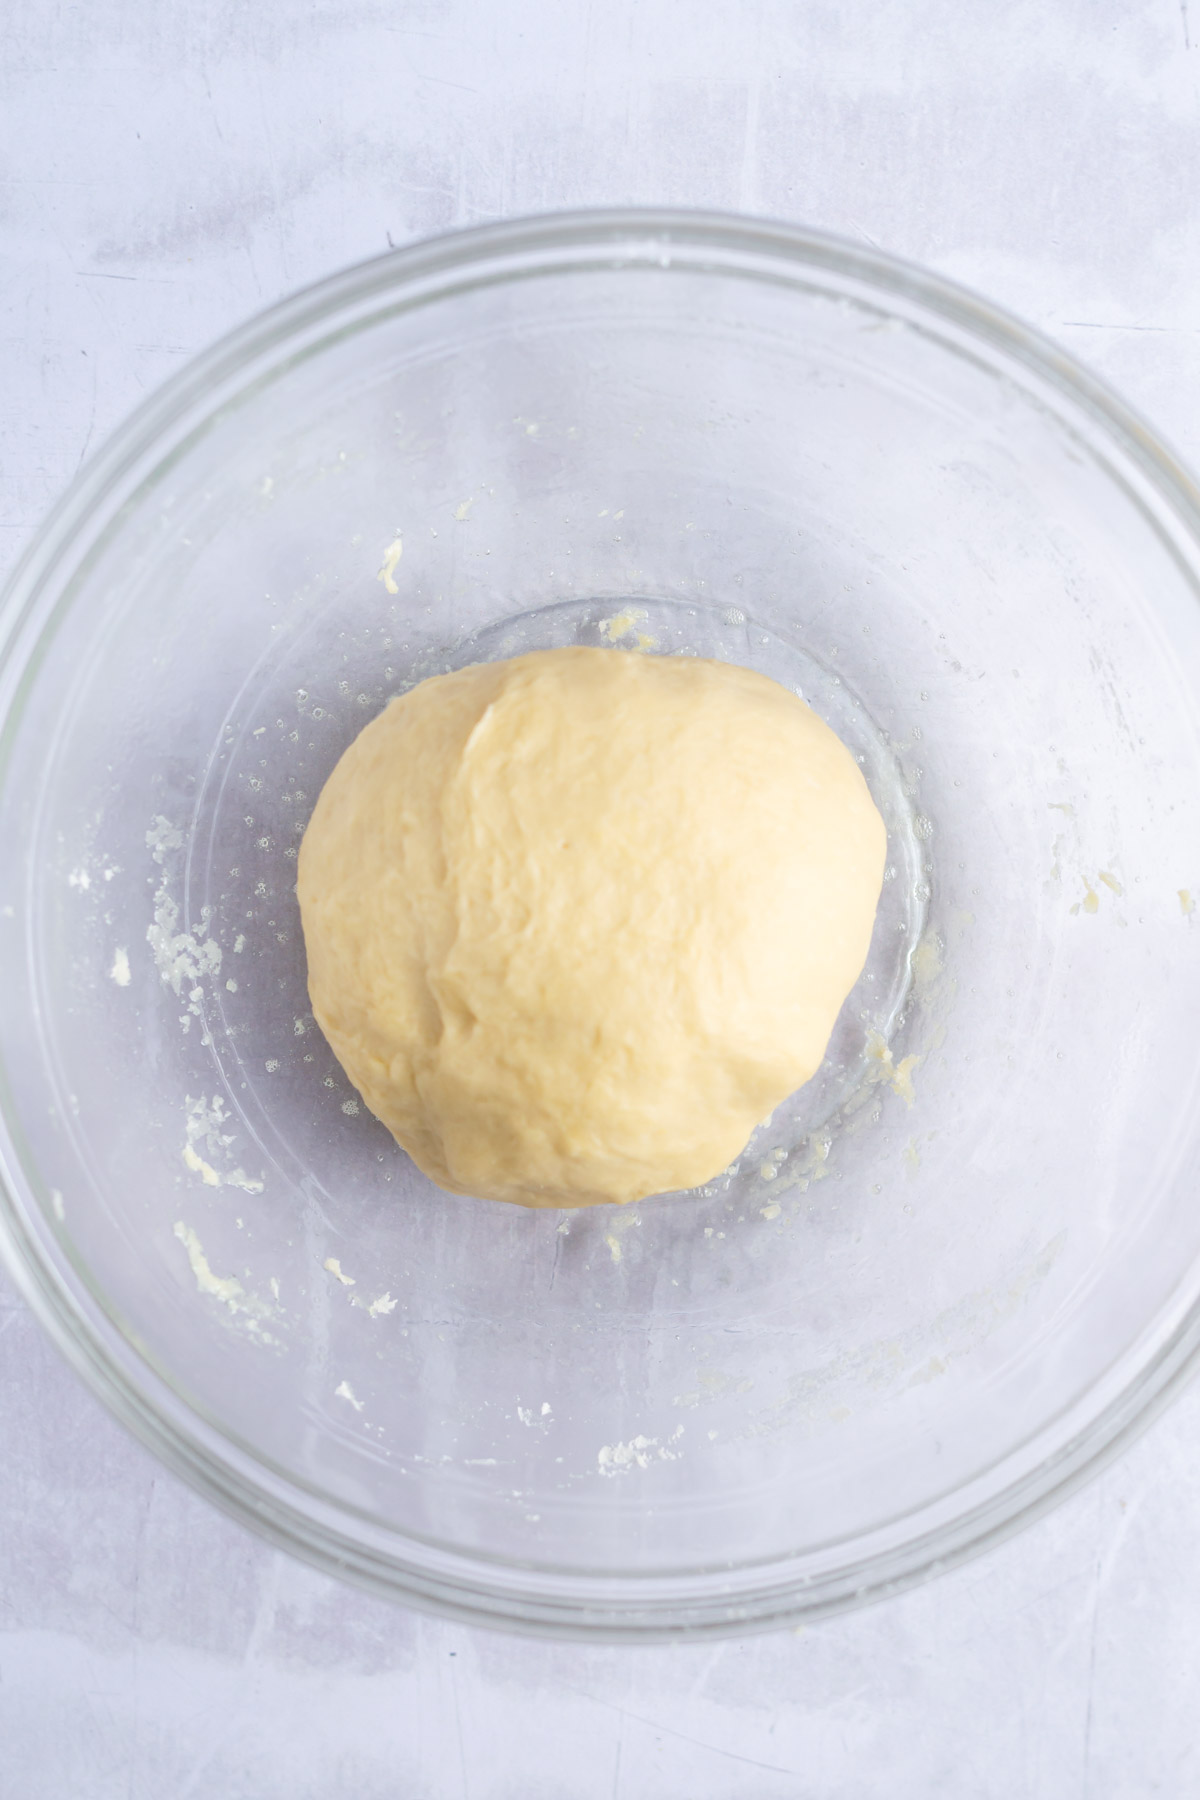 kneaded cinnamon roll dough placed in a greased bowl